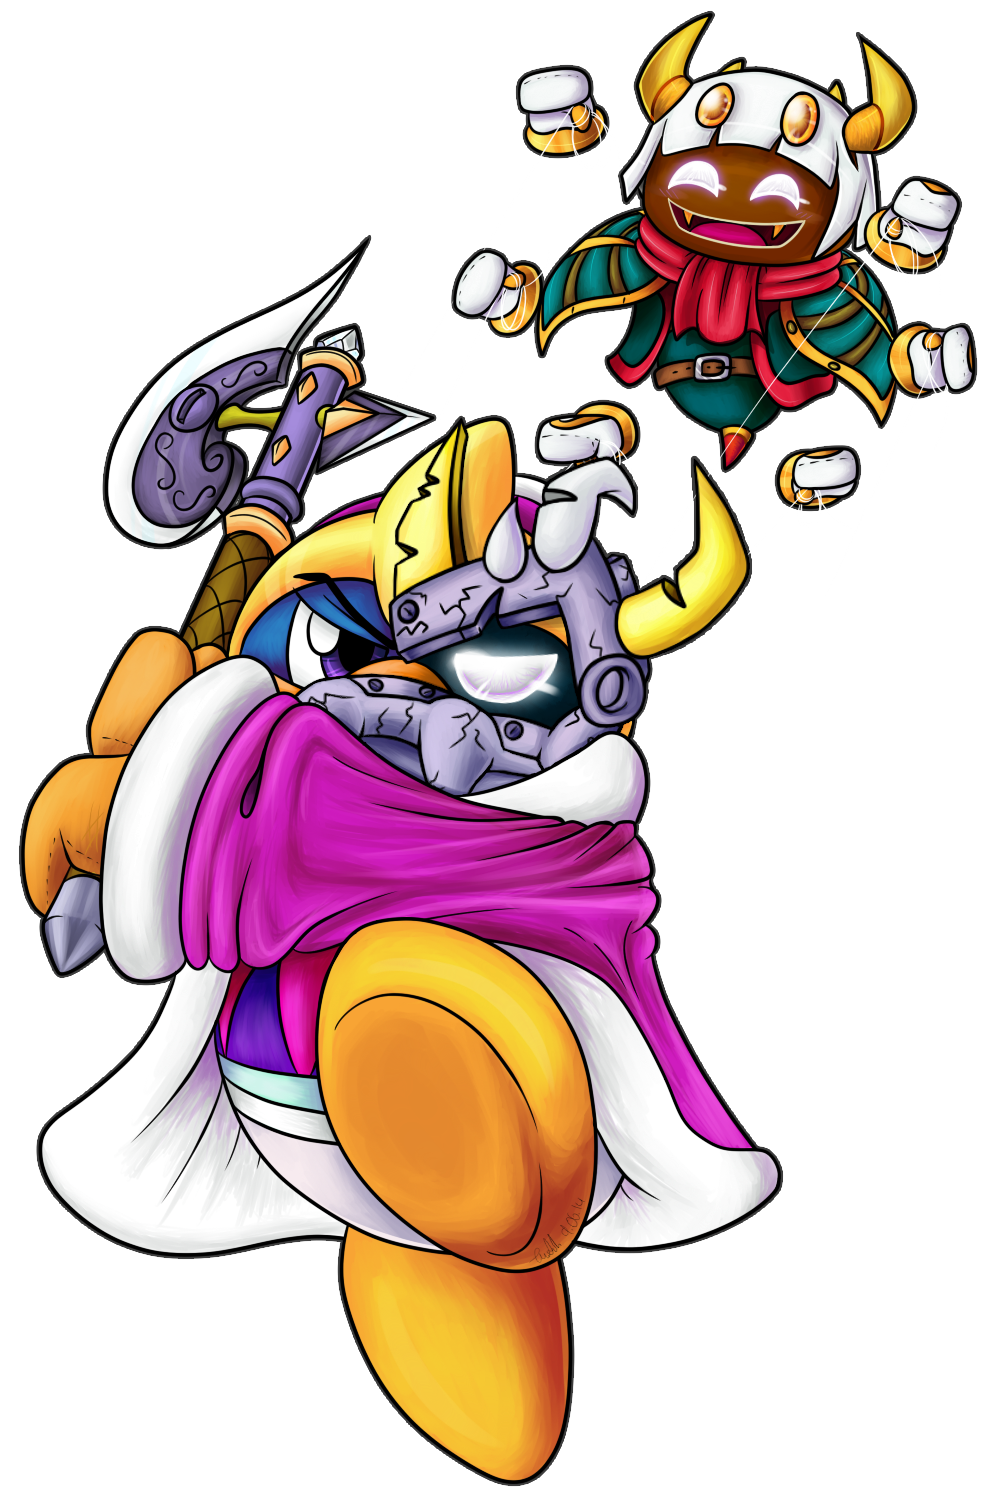 Masked Dedede and Taranza by AssassinKnight-47 on